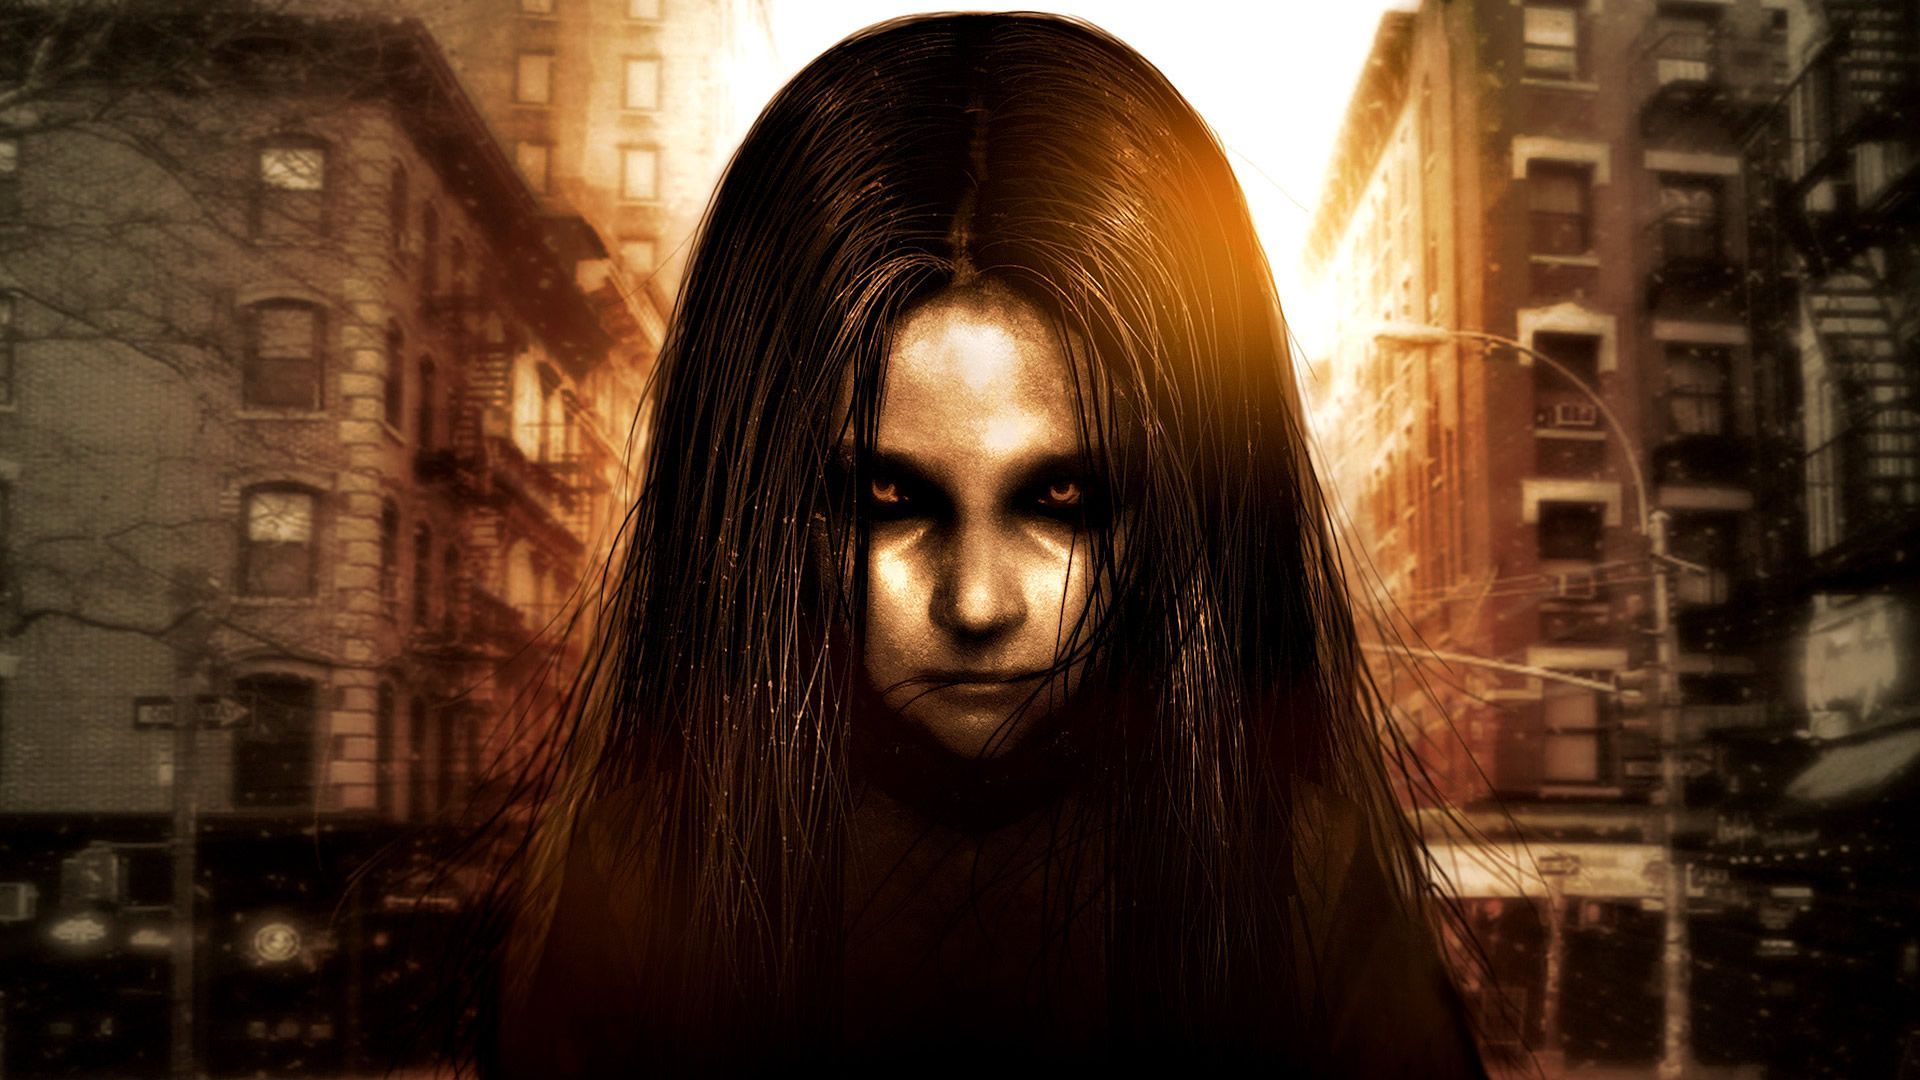 Scary Girl Wallpapers 4k Hd Scary Girl Backgrounds On Wallpaperbat